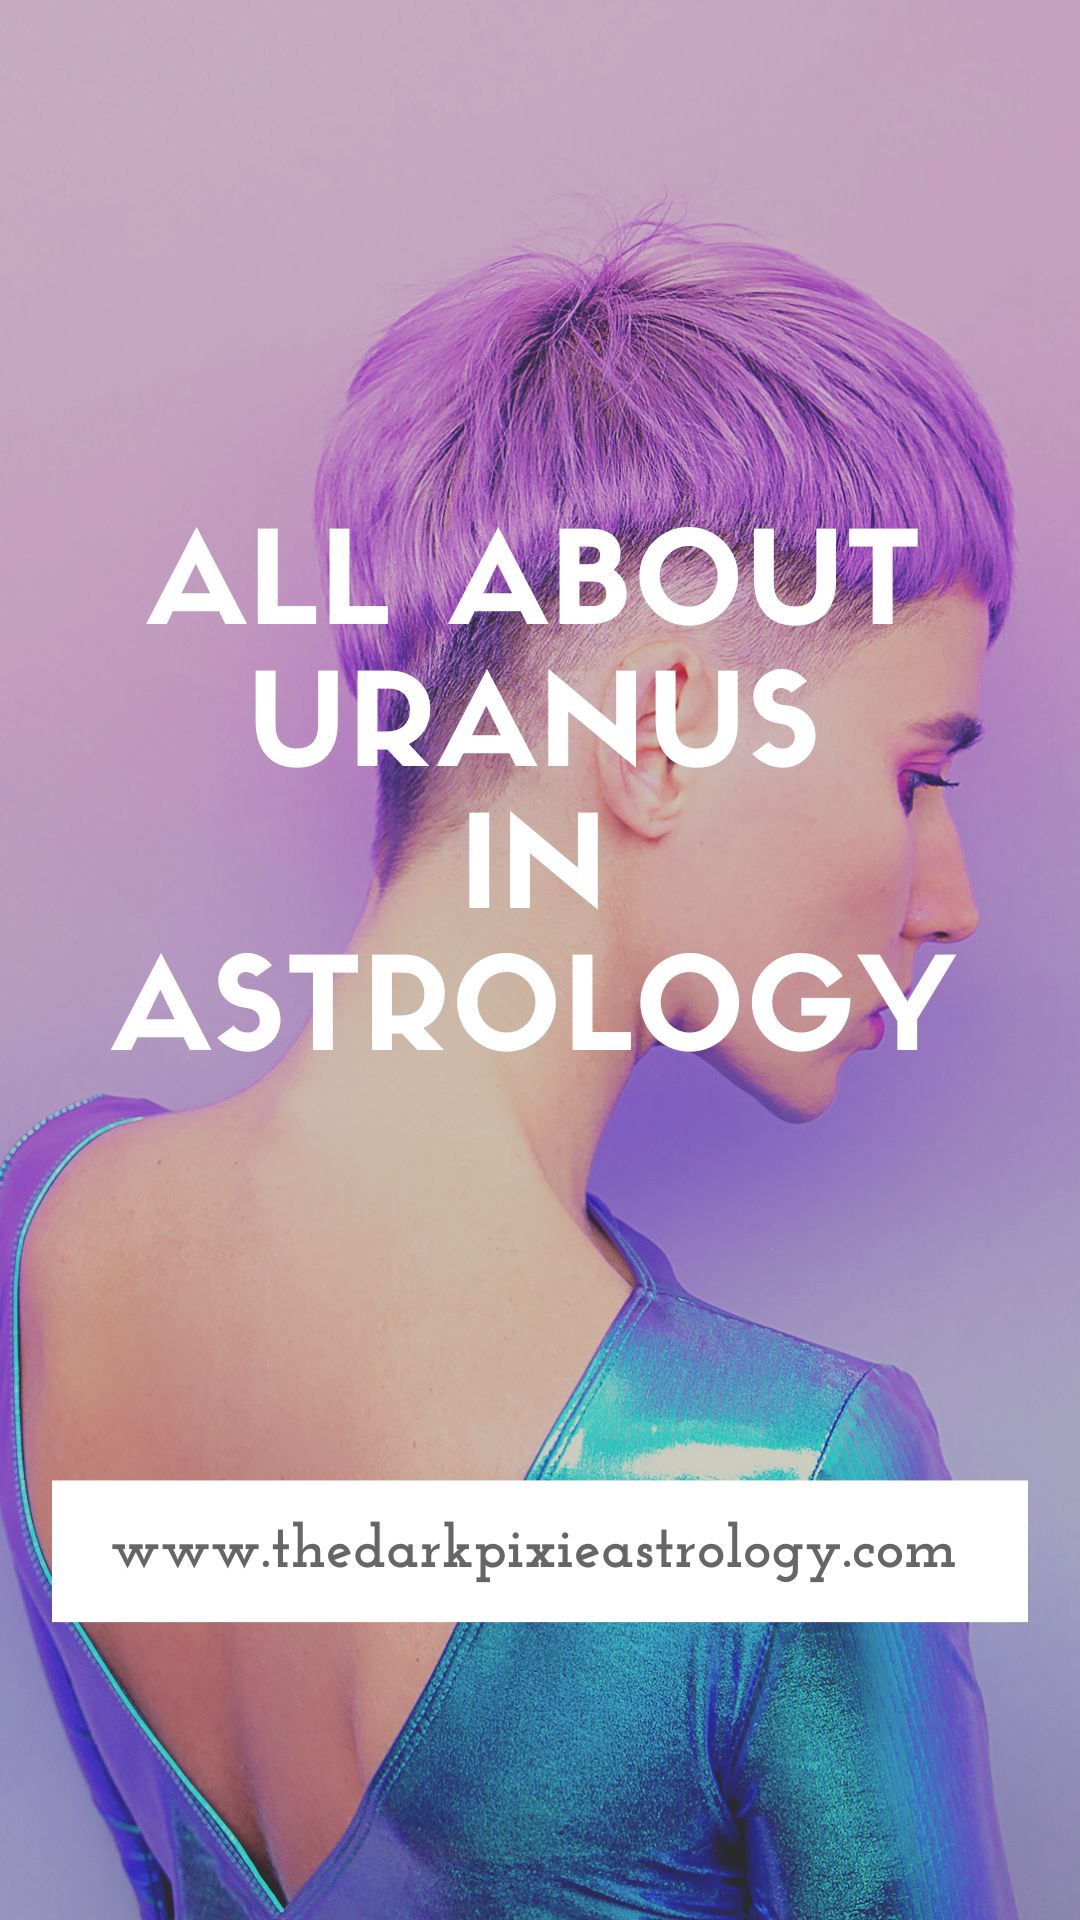 All About Uranus in Astrology - The Dark Pixie Astrology